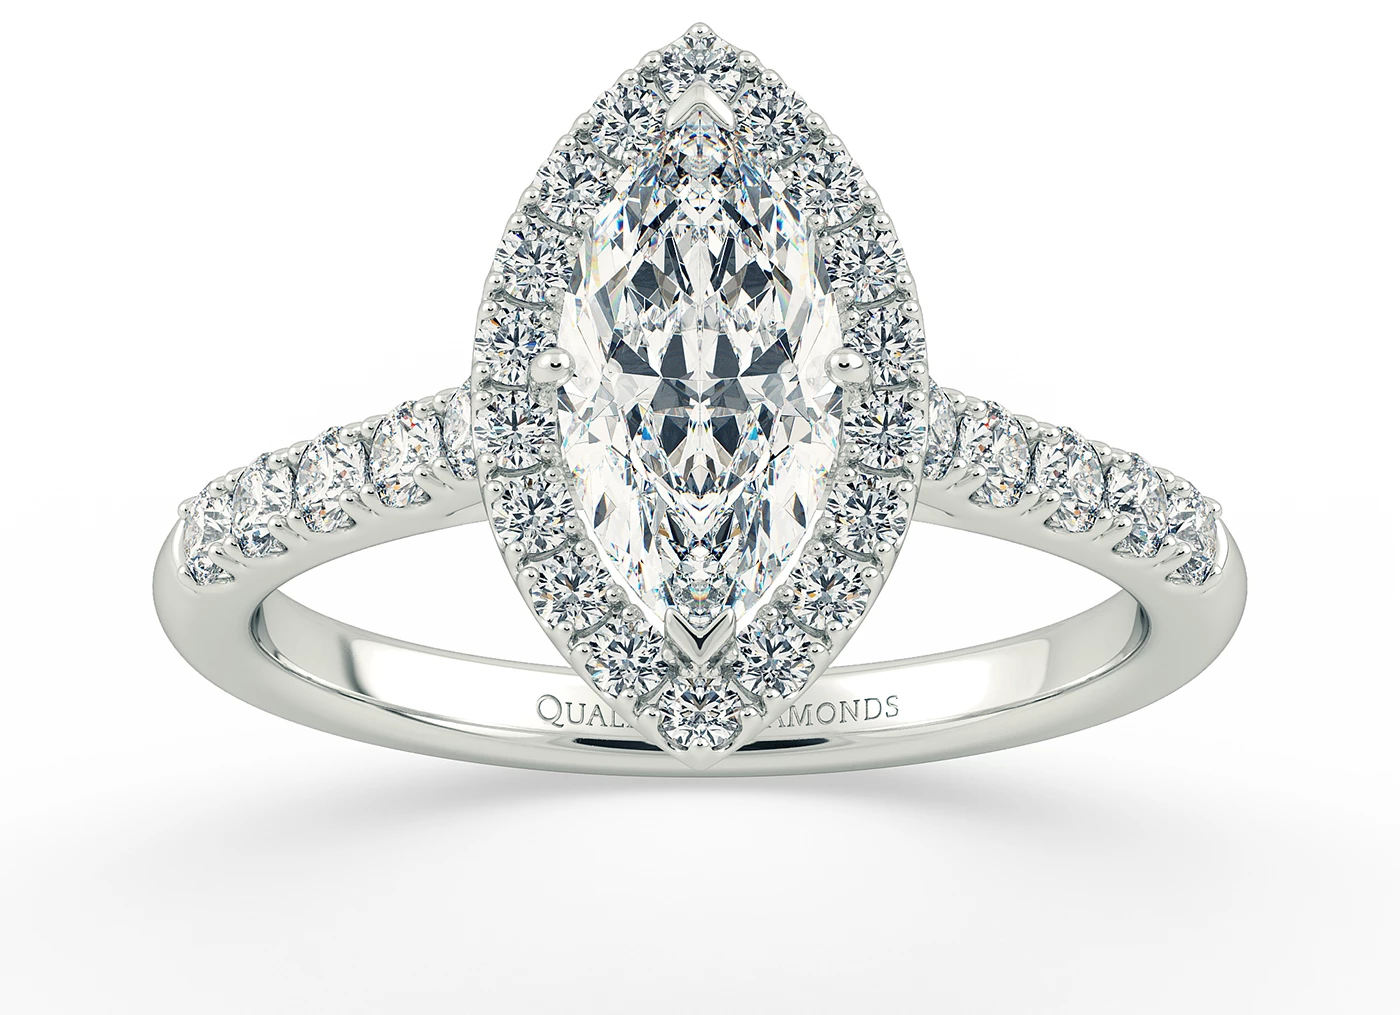 One Carat Marquise Halo Diamond Ring in 18K White Gold